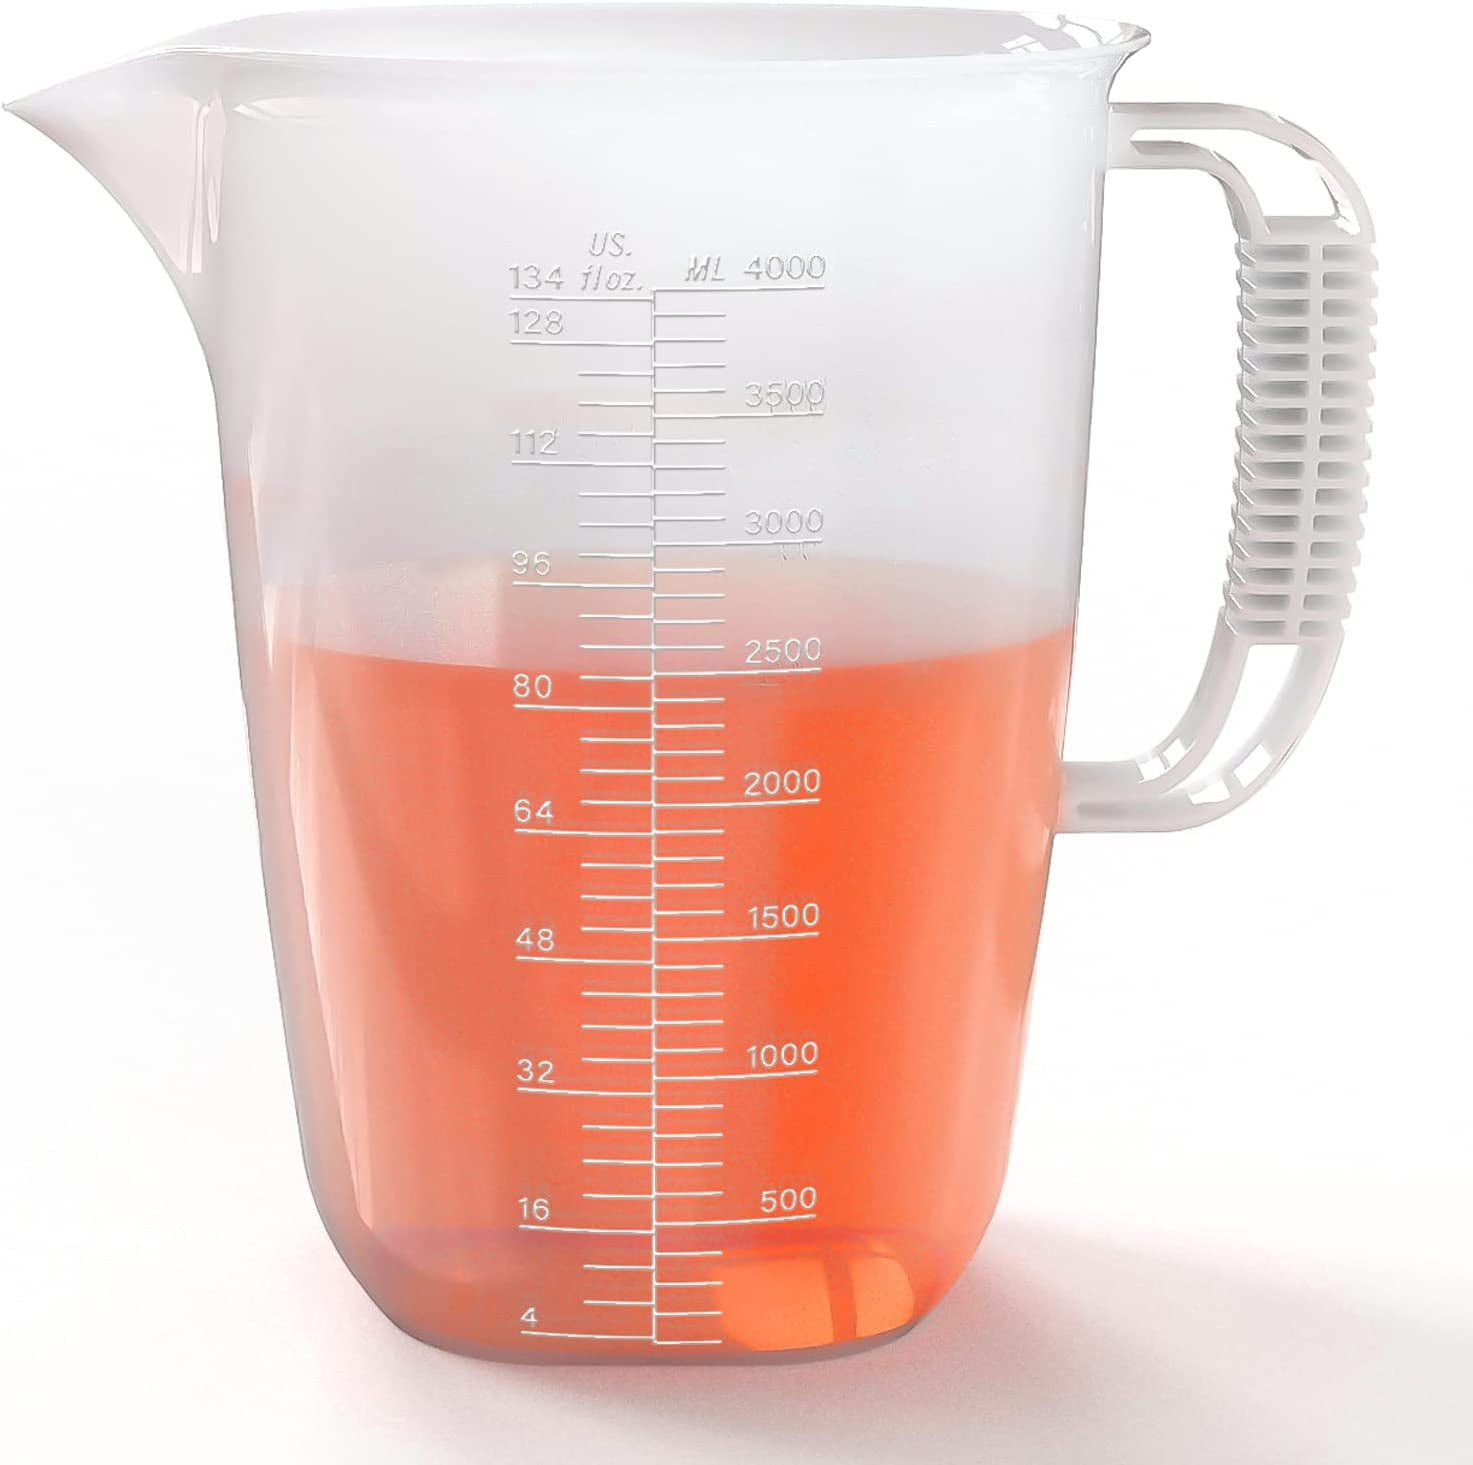 Are Measuring Jugs Designed to be Heated? - Pro-measures